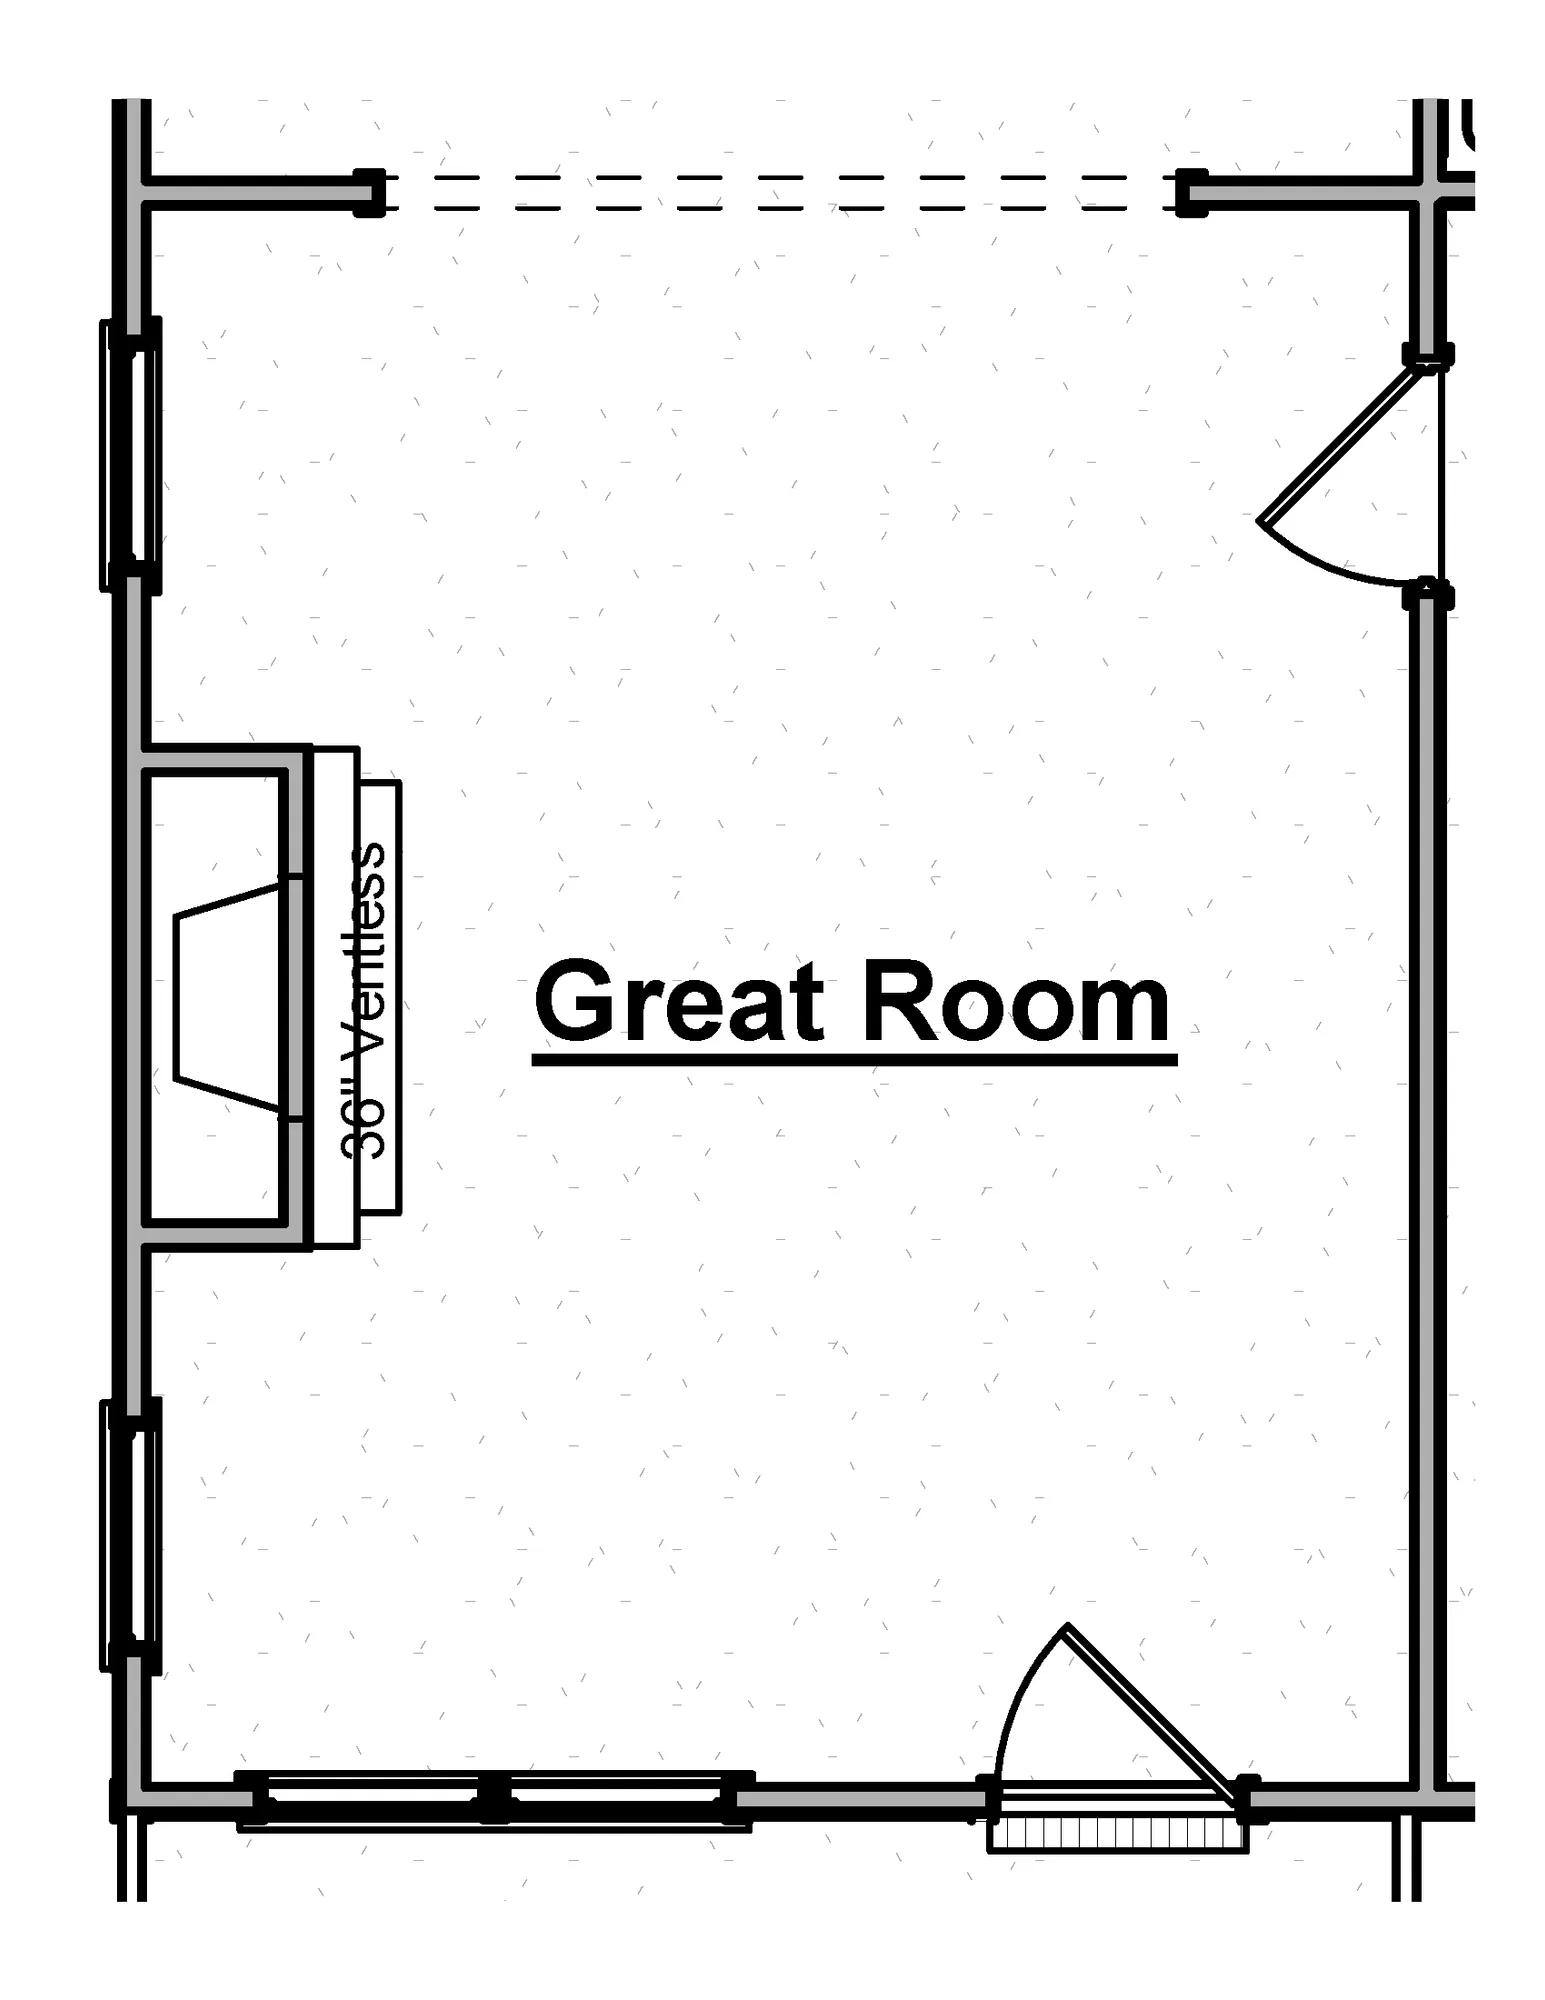 Great Room - Fireplace Bump-In - undefined